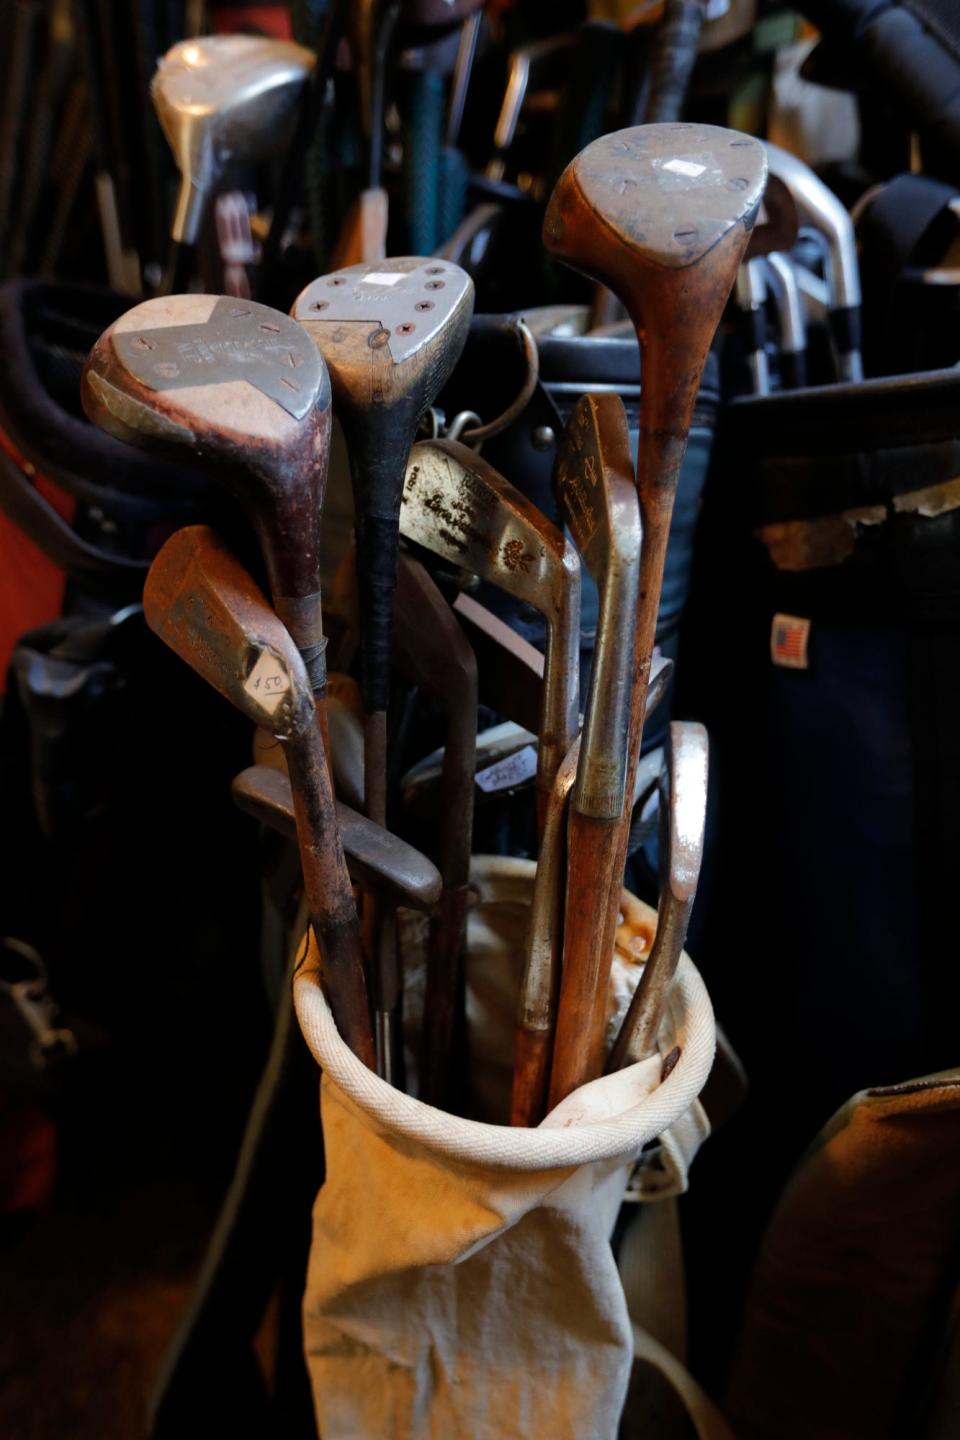 Taking advantage of an interest in classic collectibles, John Berg picked up about dozens of wood clubs as well as 1,200 wedges and irons from the 1960s, which he sold either off his front porch or on trips to San Diego.